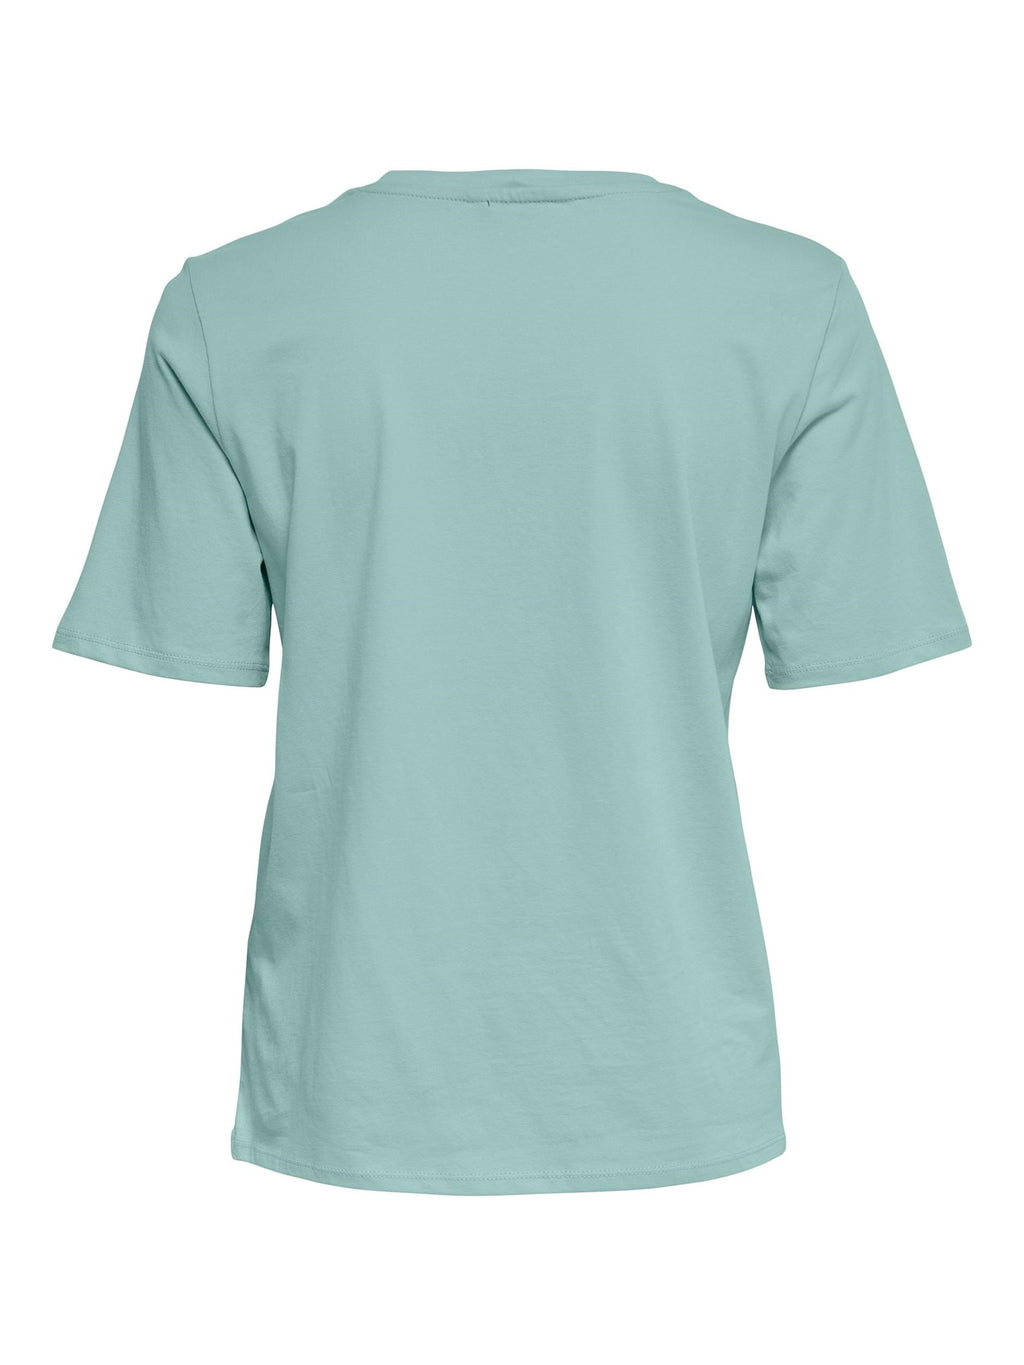 New-Only T-Shirt - Harbor Gray